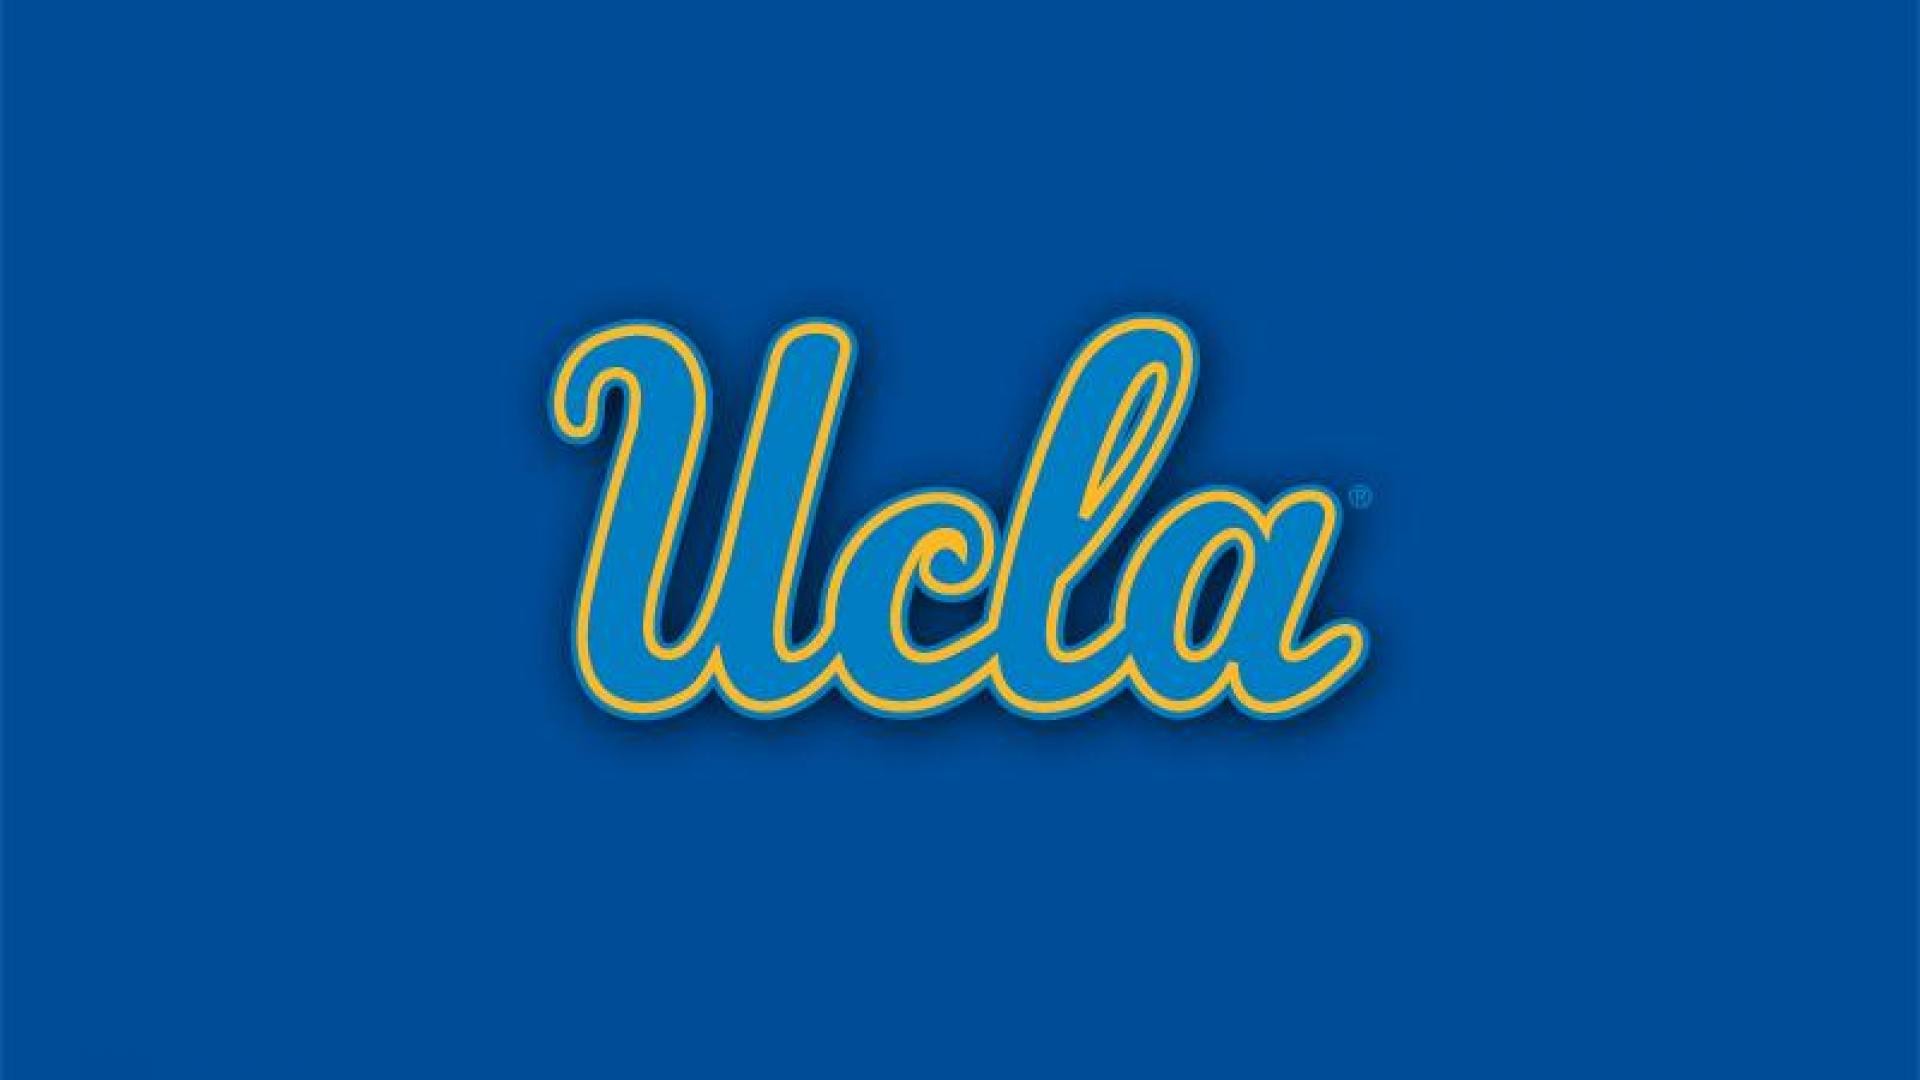 1920x1080 Ucla - (#68782) - High Quality and Resolution Wallpapers on hqWallbase .